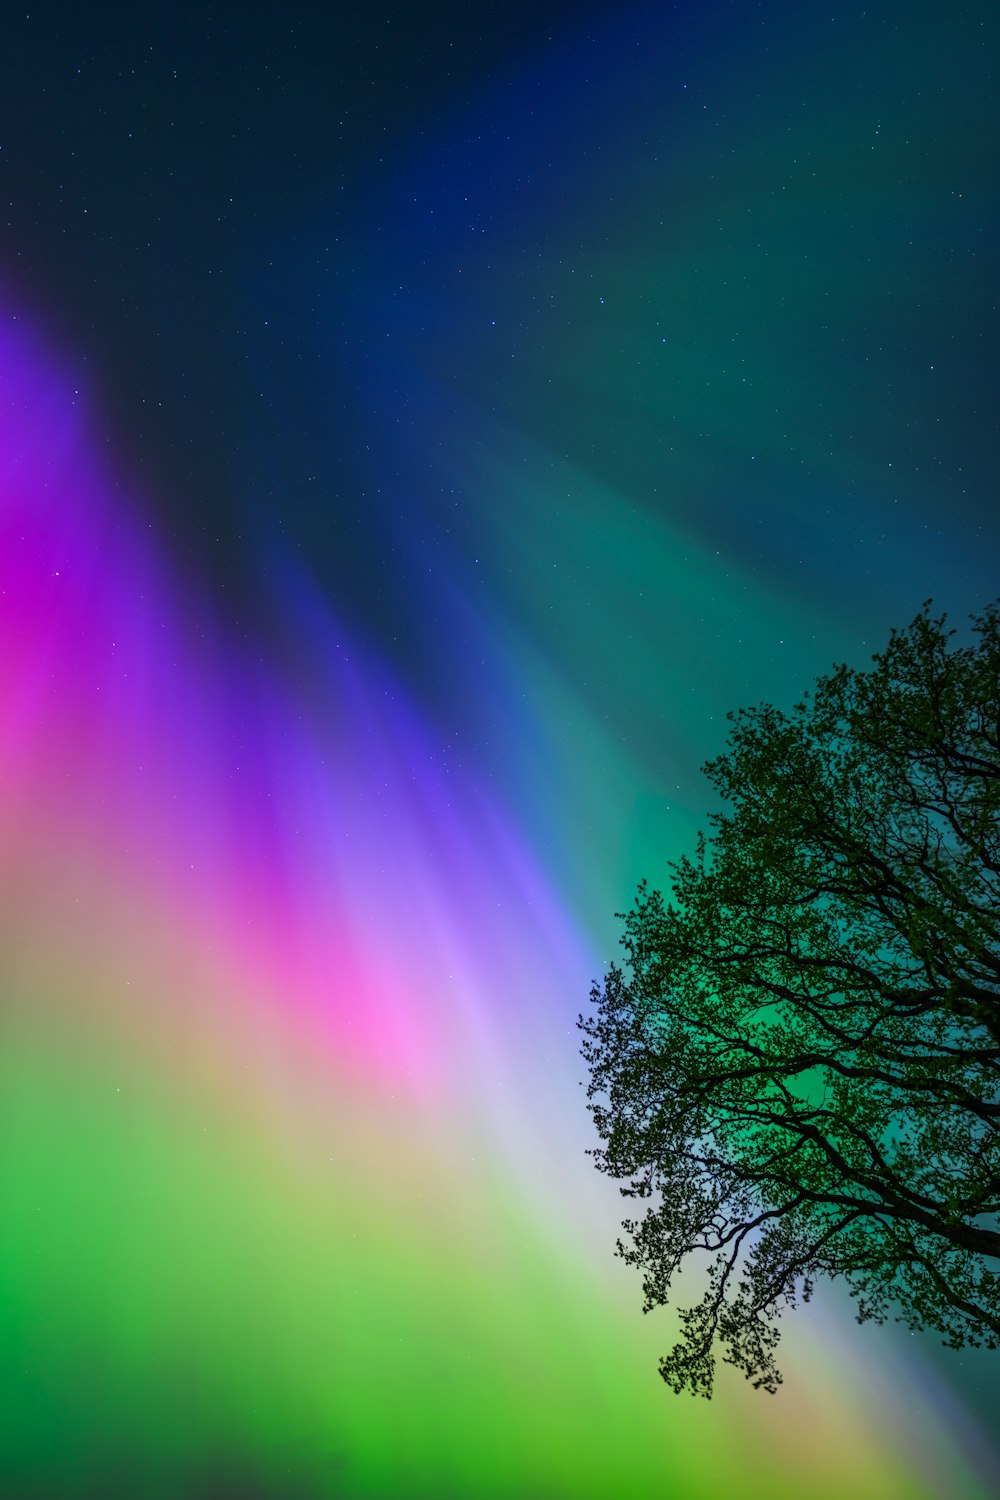 the aurora bore is shining brightly in the night sky